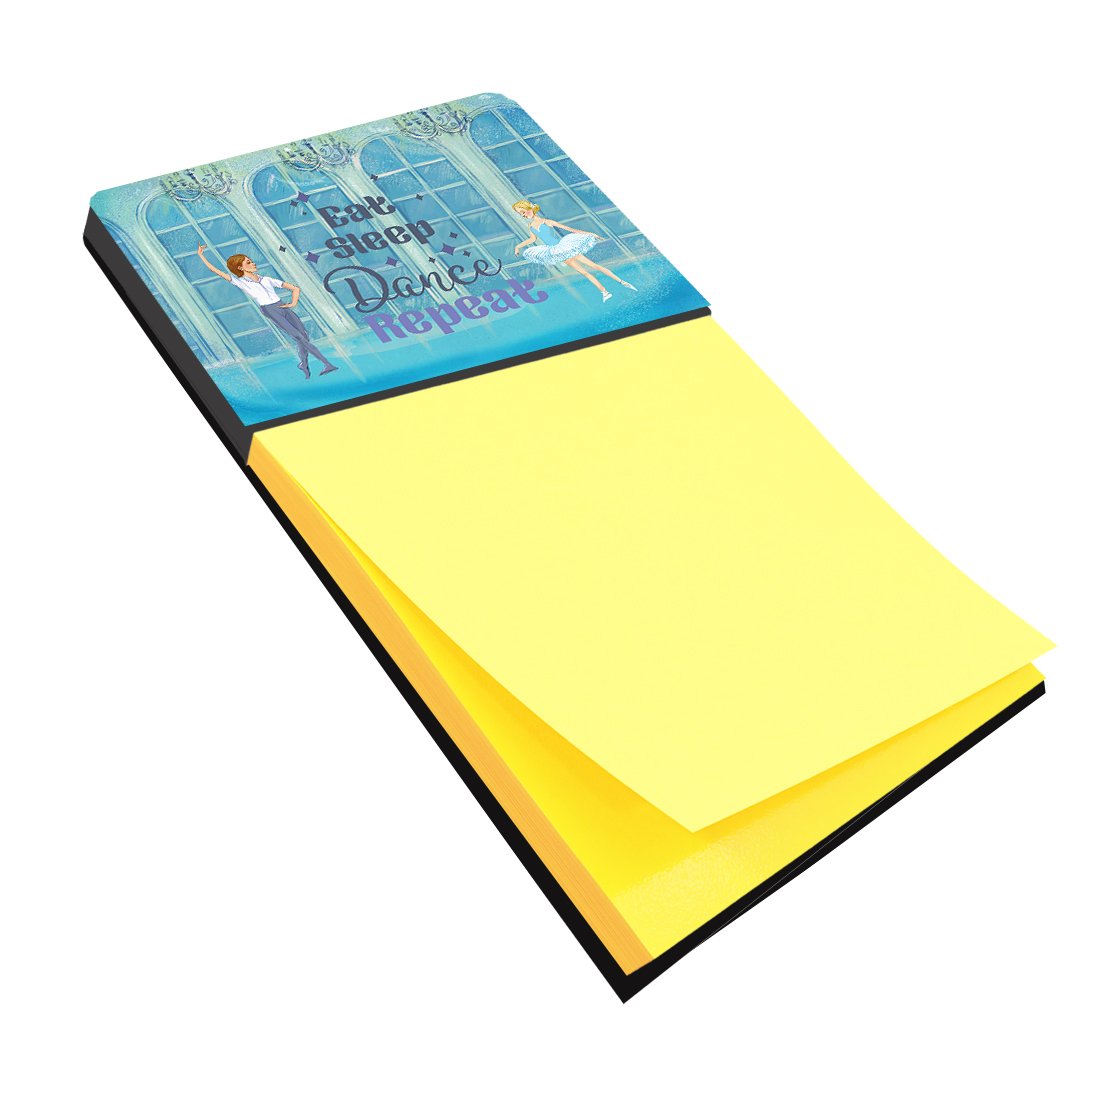 Buy this Eat Sleep Dance Repeat Sticky Note Holder